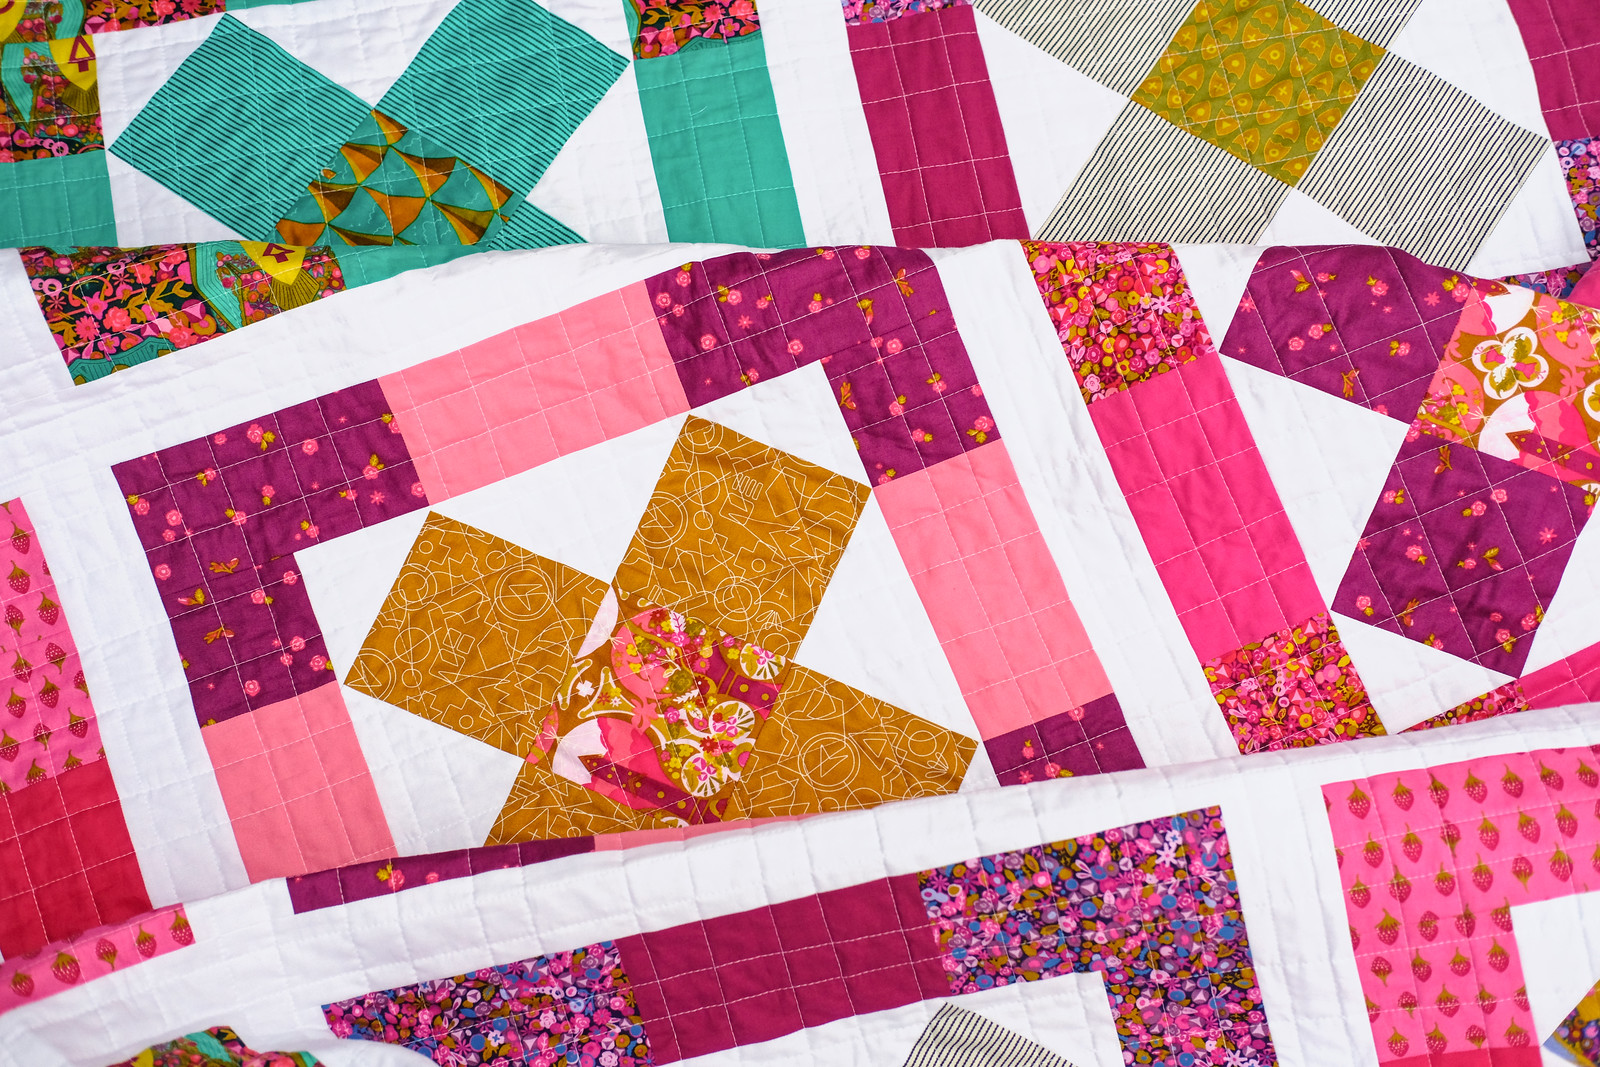 Kriss Cross in Road Trip - Modern Quilts Block by Block Book Tour